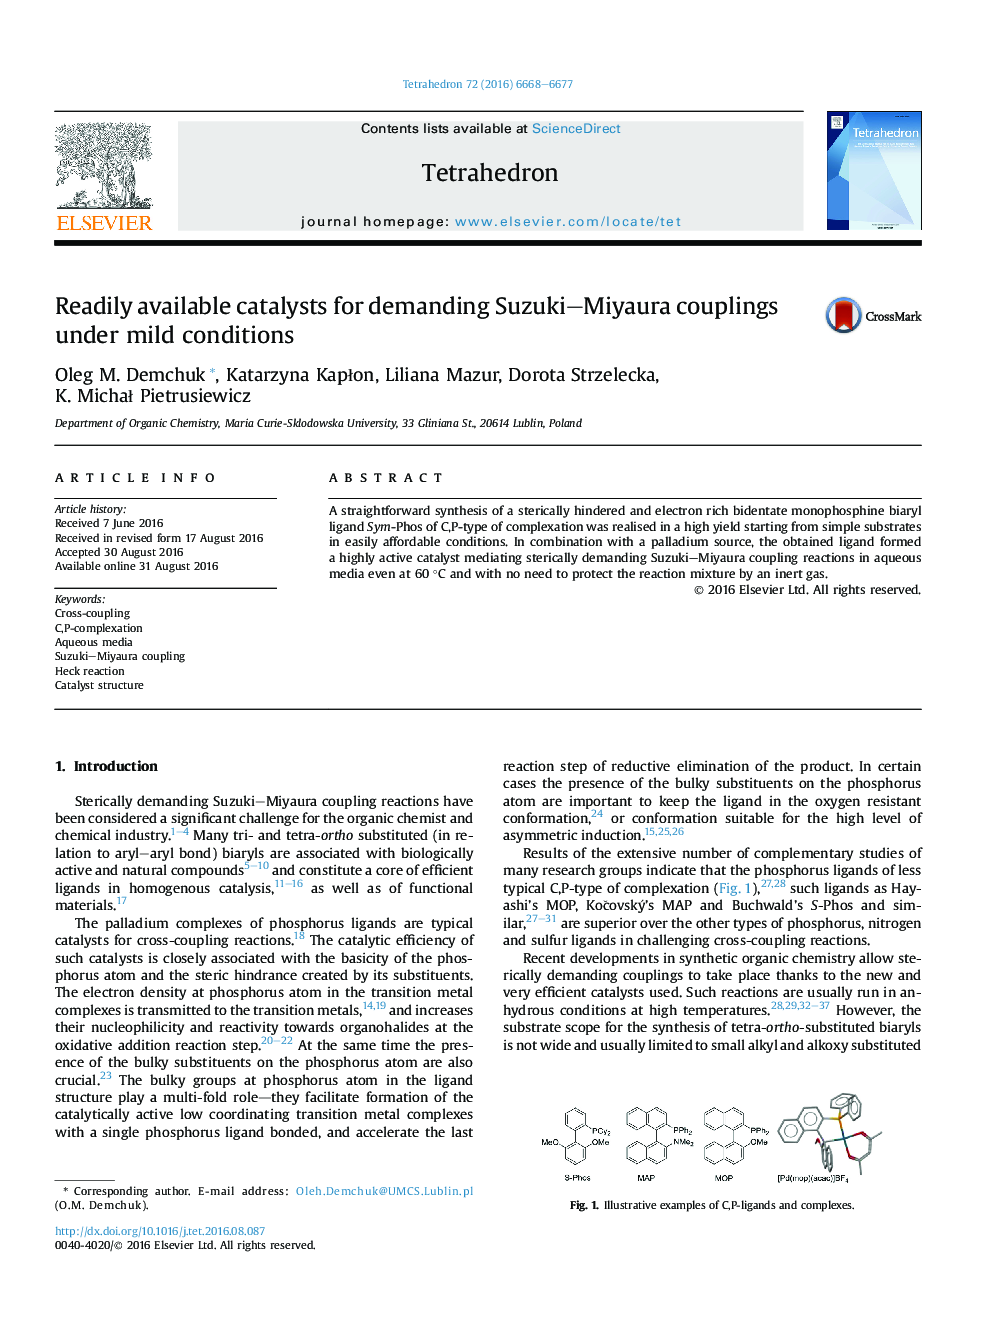 Readily available catalysts for demanding Suzuki-Miyaura couplings under mild conditions